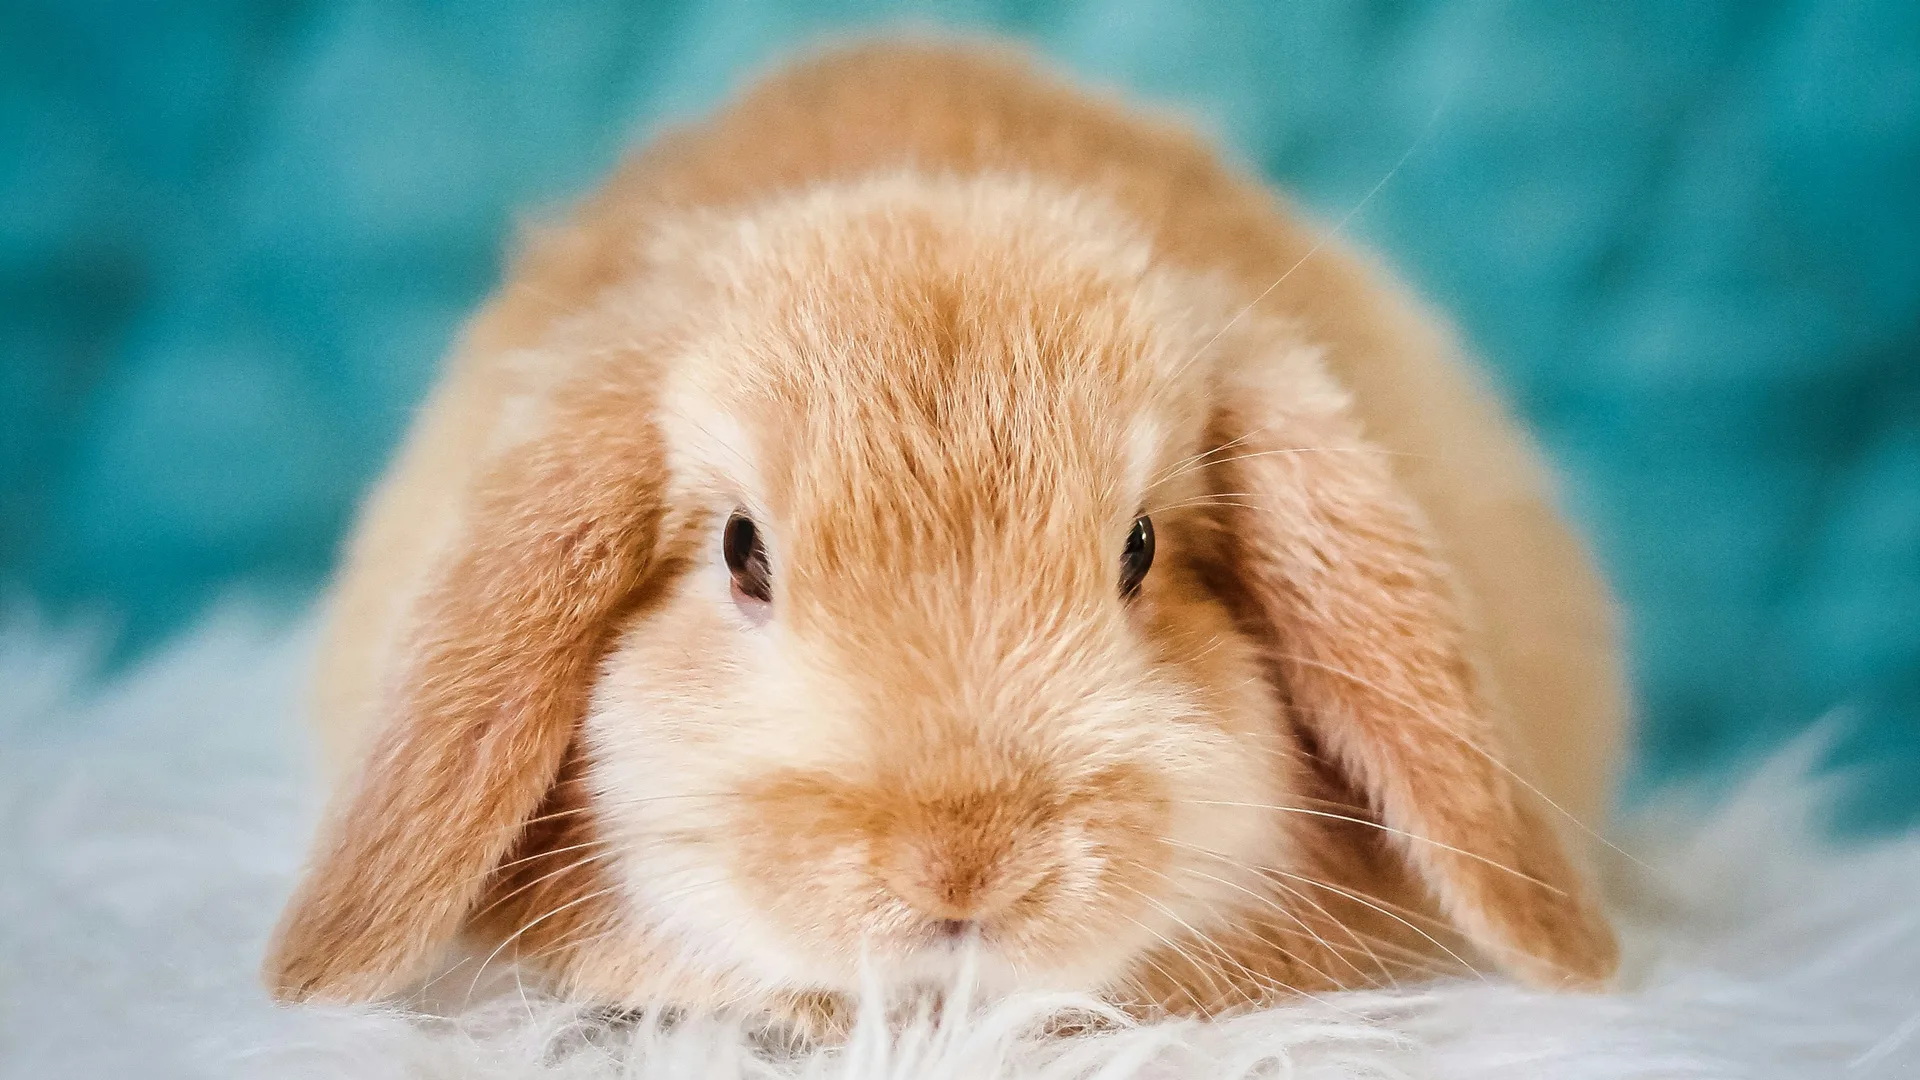 A photograph of a blonde bunny with floppy ears lying on a white furry rug against an out of focus blue background